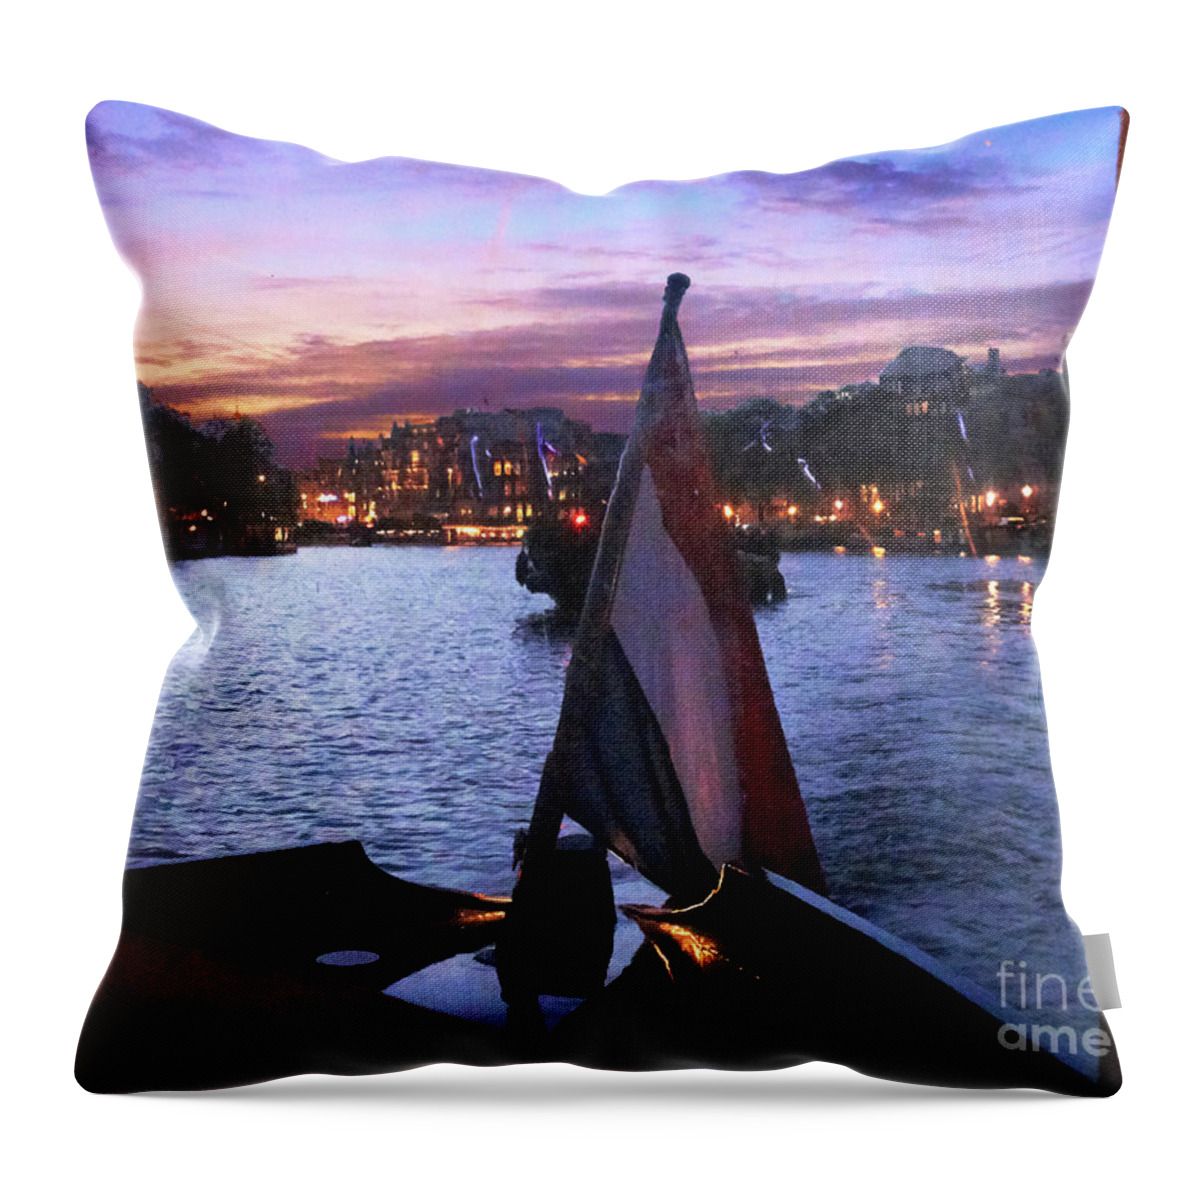 Sunset Throw Pillow featuring the photograph Canal Sunset by Steve Ondrus